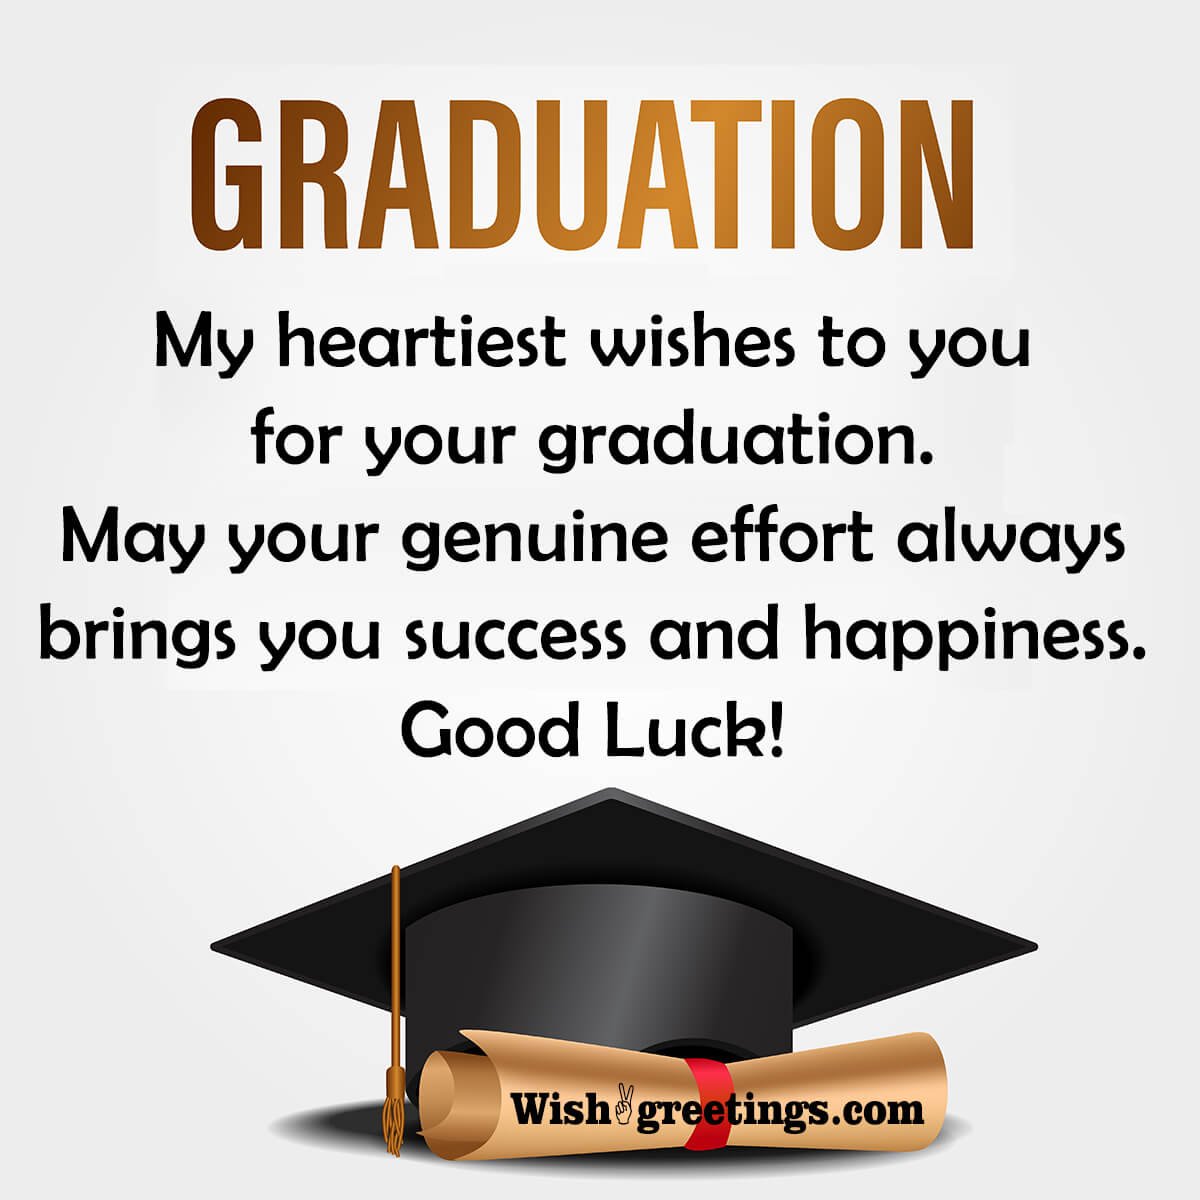 Graduation Wishes Images Wish Greetings